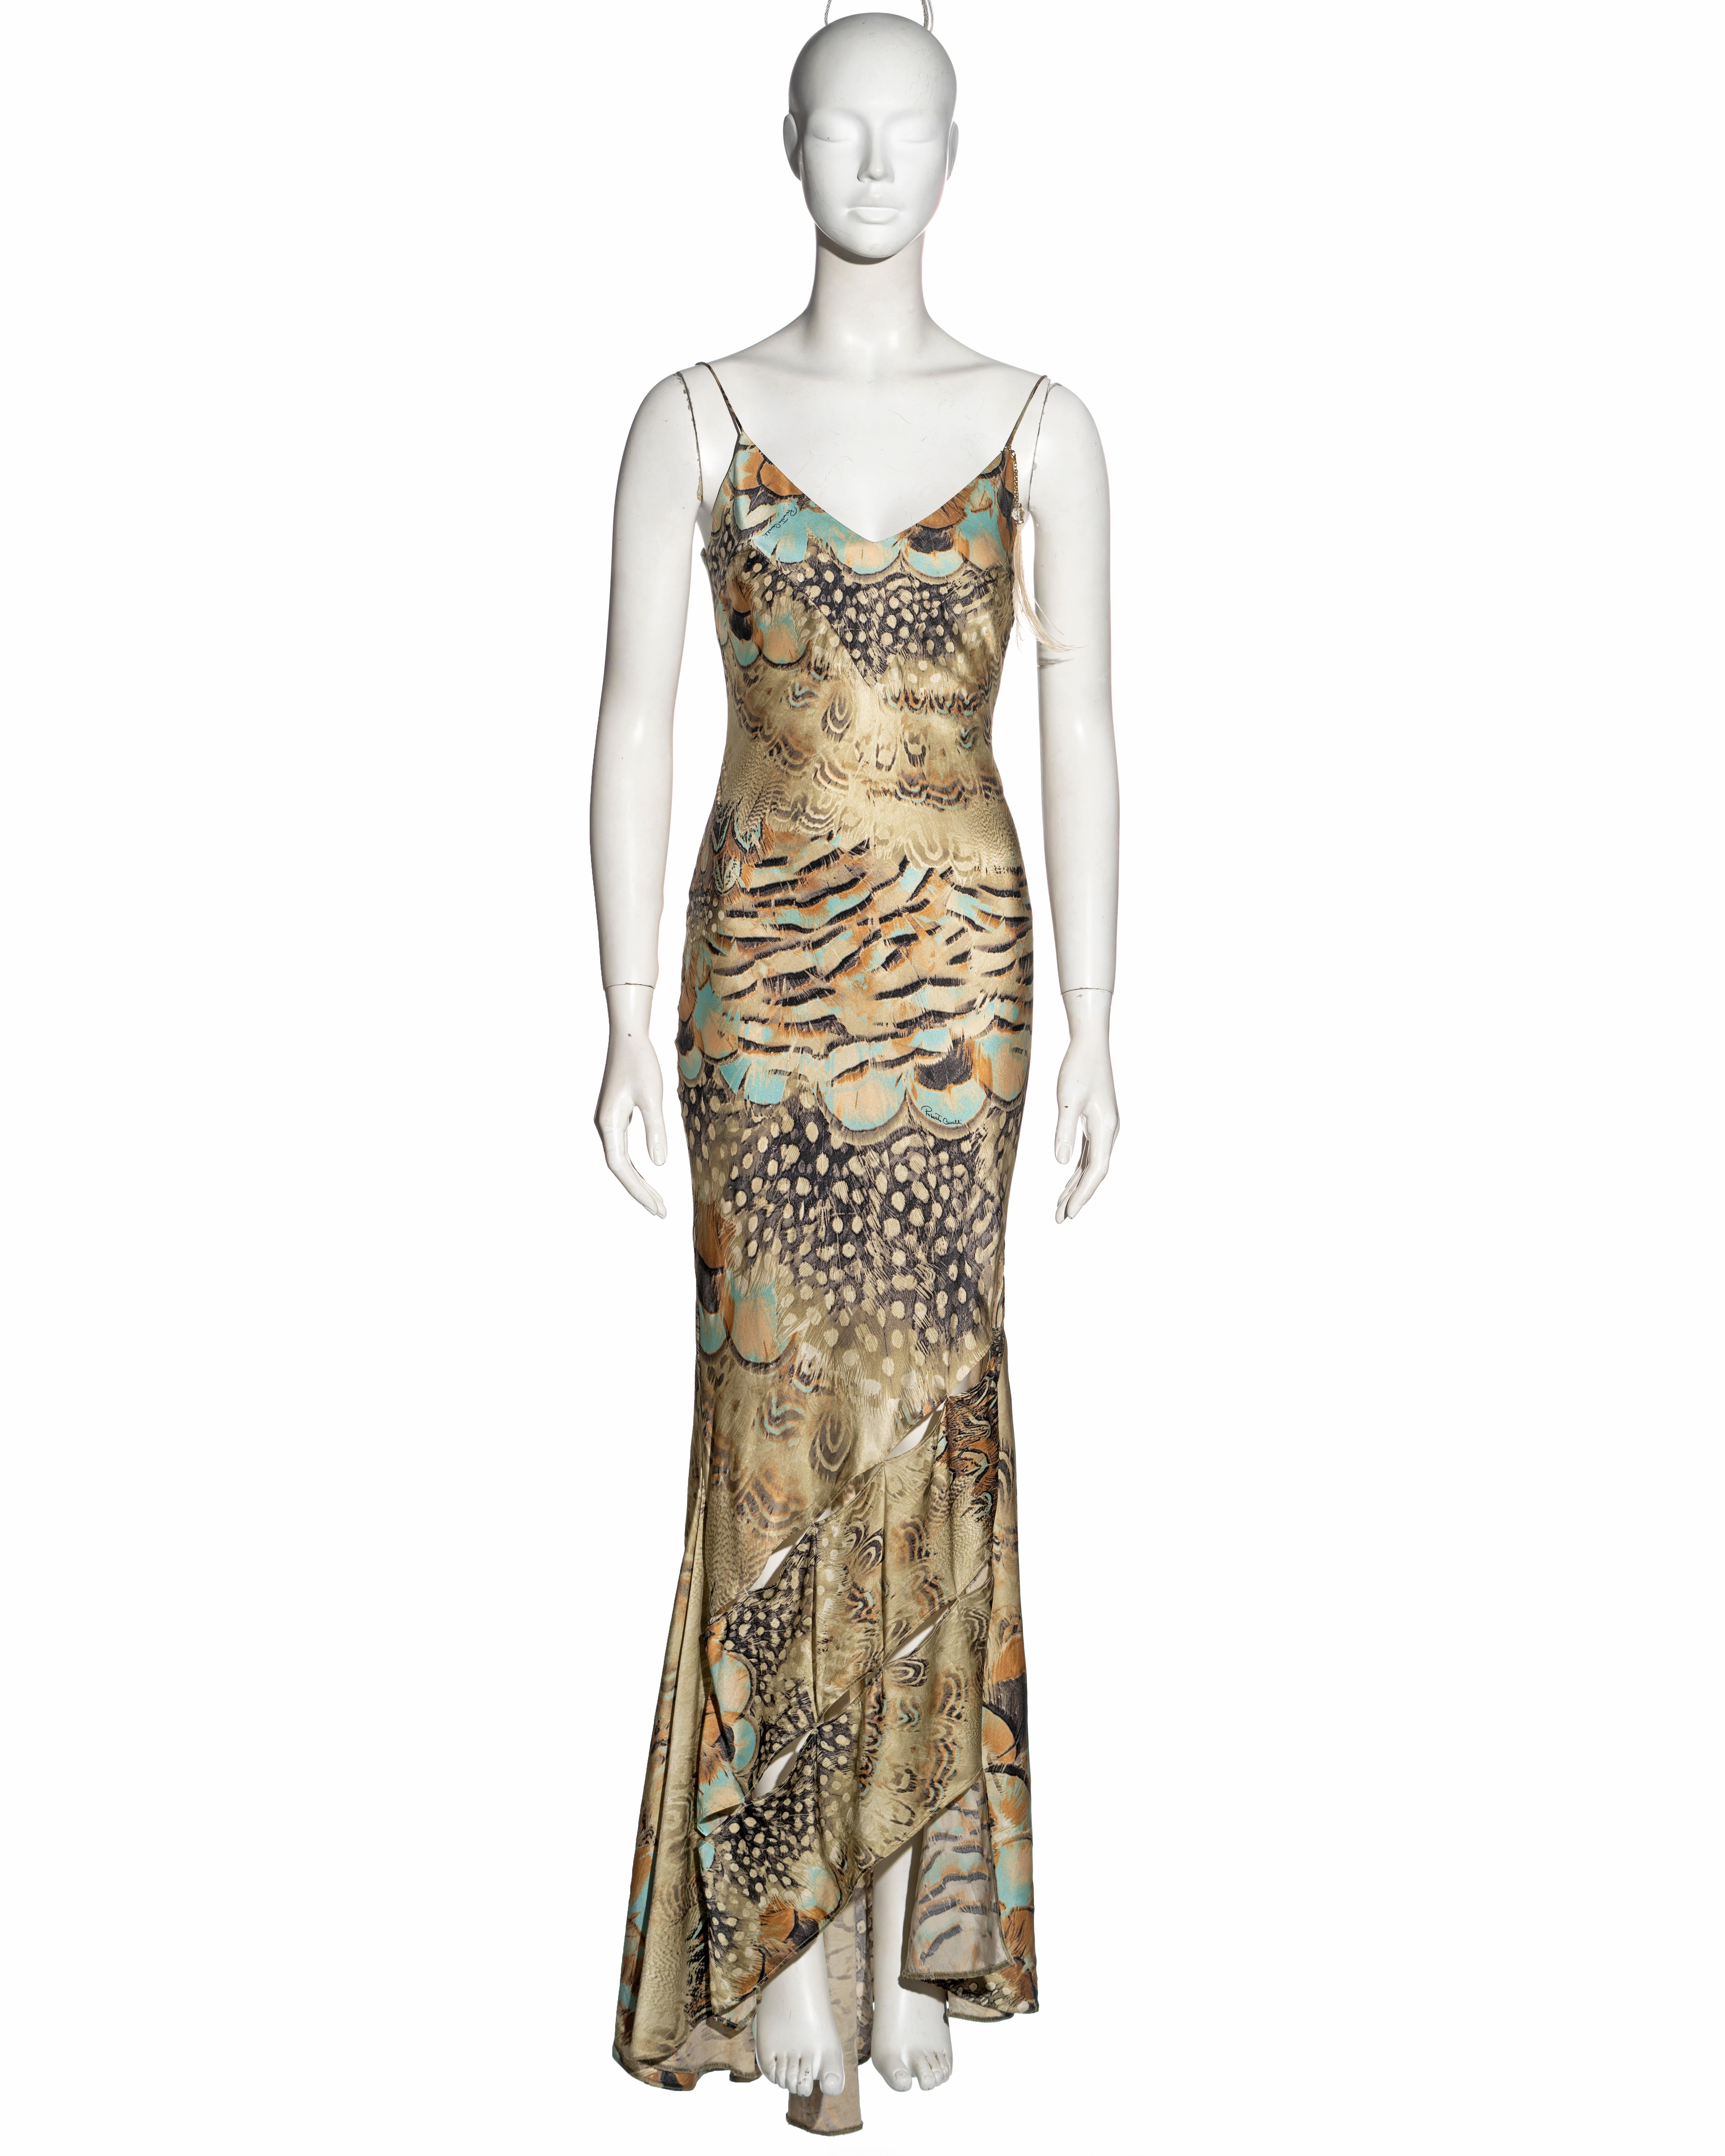 ▪ Roberto Cavalli evening dress
▪ Sold by One of a Kind Archive
▪ Constructed from bias-cut feather printed silk
▪ Matching large scarf which can be worn as a shawl or headscarf 
▪ The seams of the skirt have openings which bare the skin of the